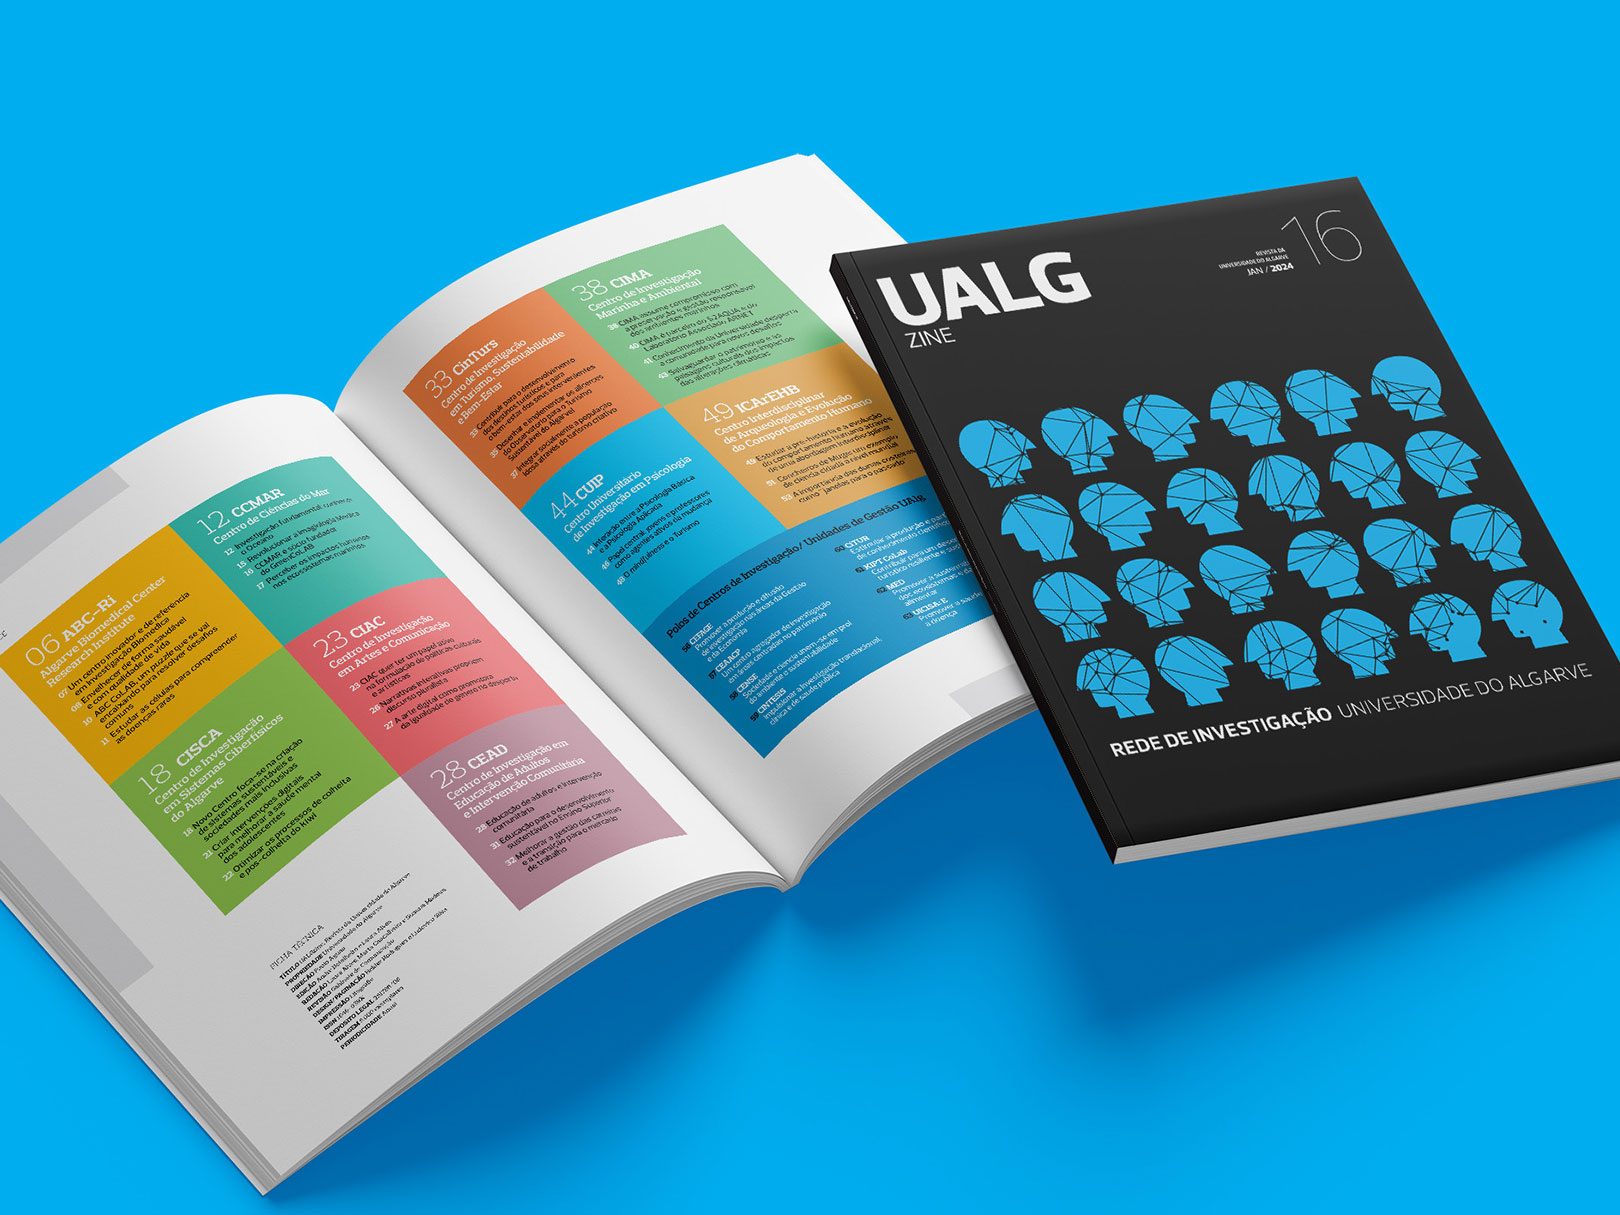 CIAC represented in the latest edition of UALGzine